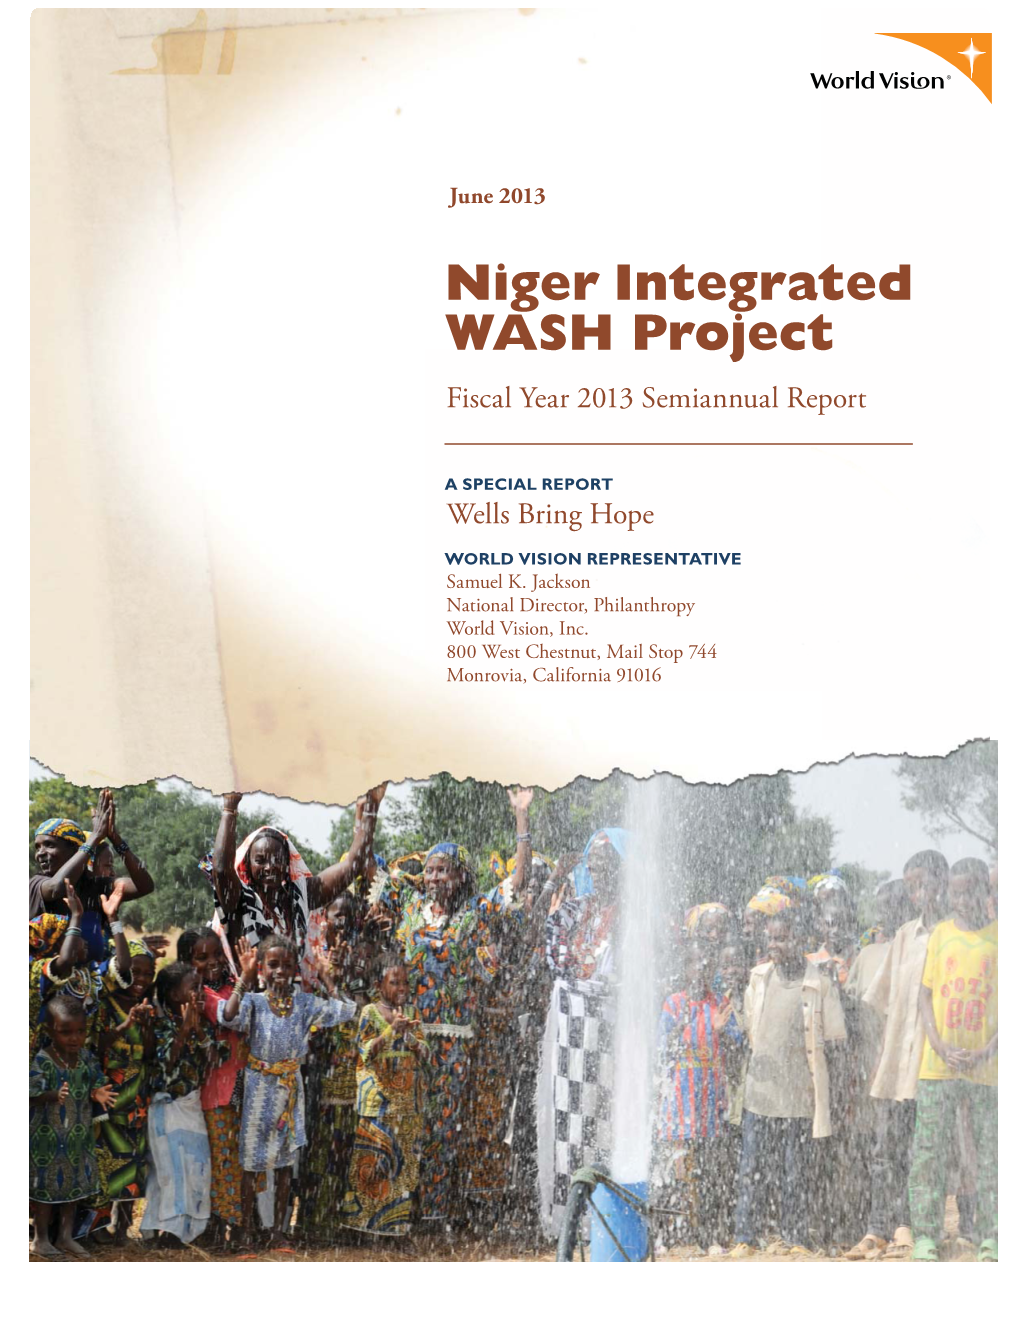 Niger Integrated WASH Project Fiscal Year 2013 Semiannual Report